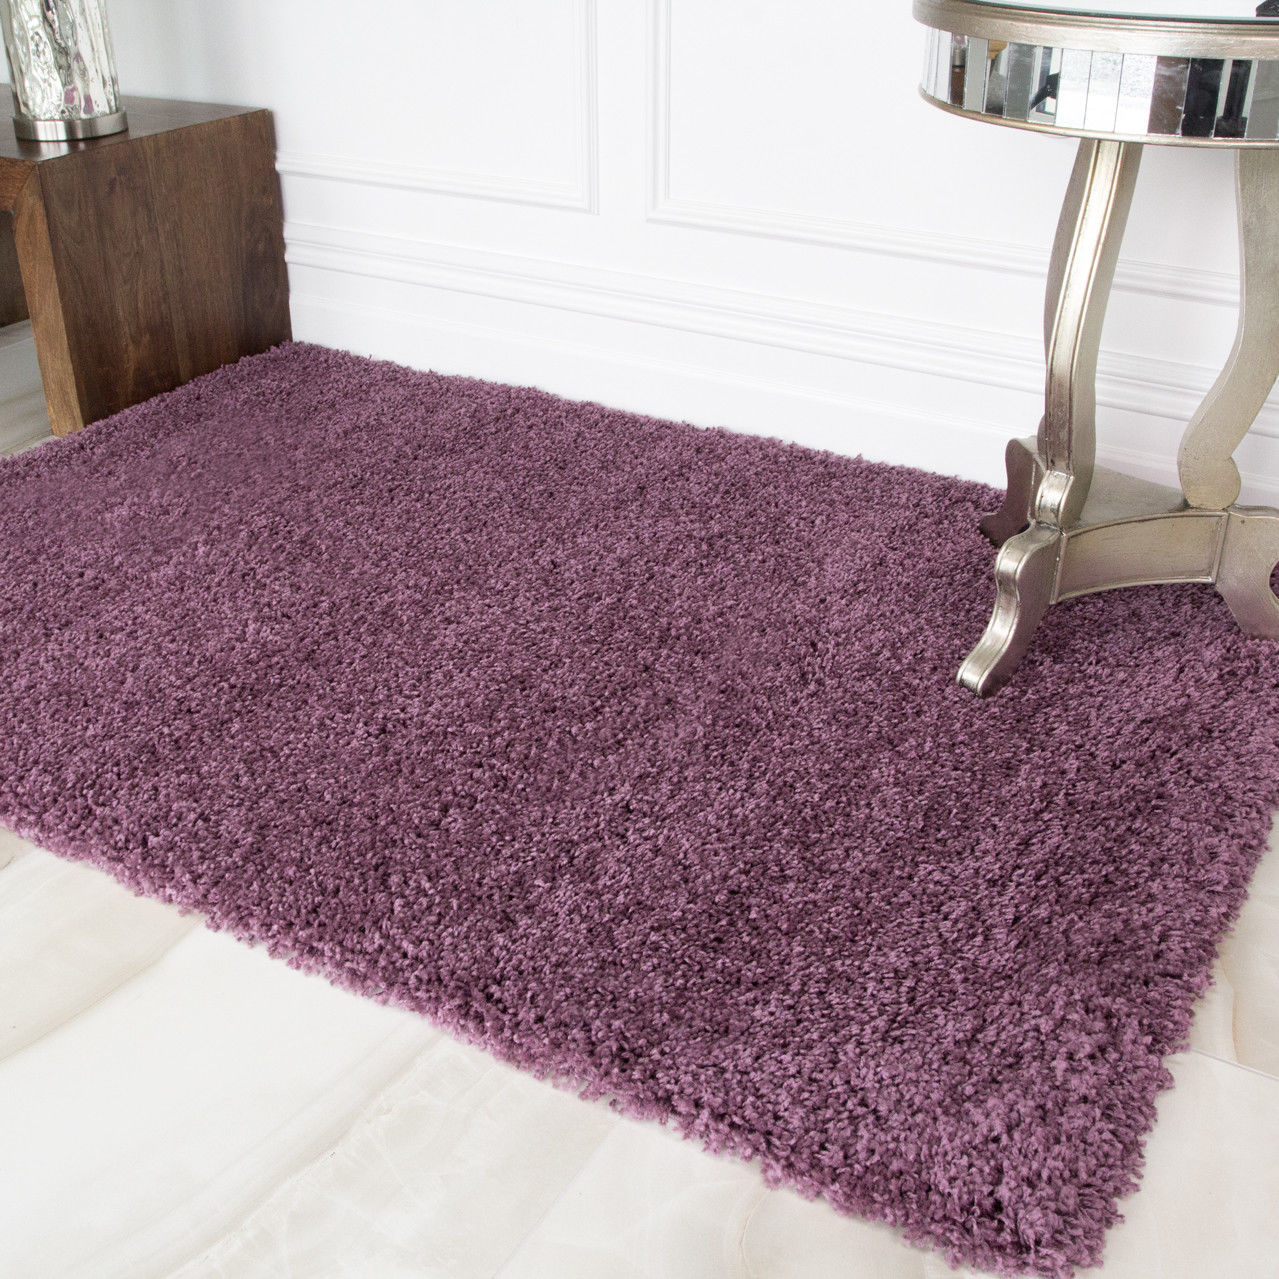 SMALL LARGE THICK SOFT MAUVE PURPLE SHAGGY RUGS NON SHED 5cm PILE MODERN RUGS 